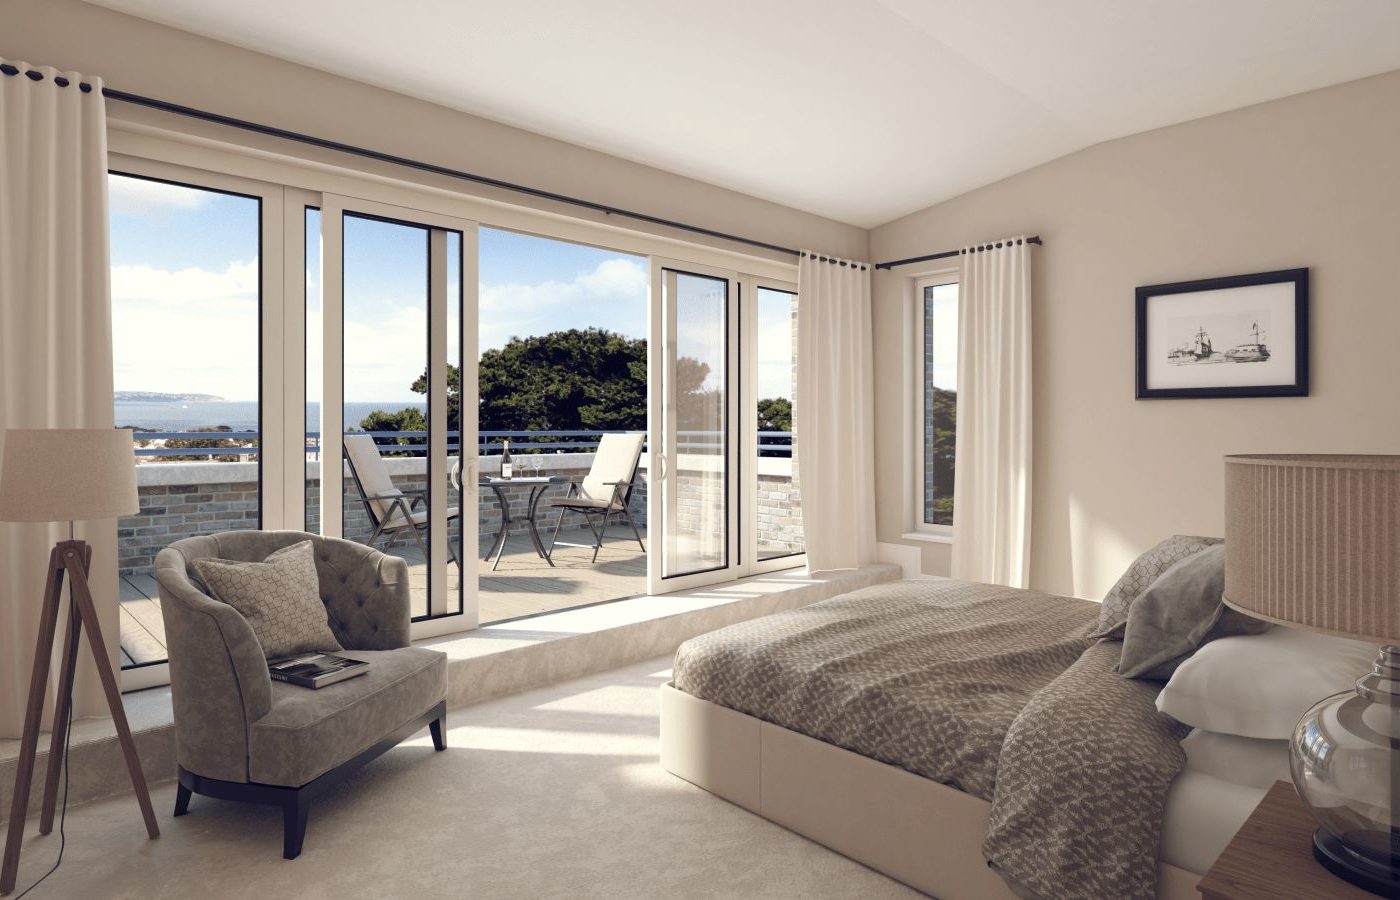 Sea View Homes Bedroom RESIZE